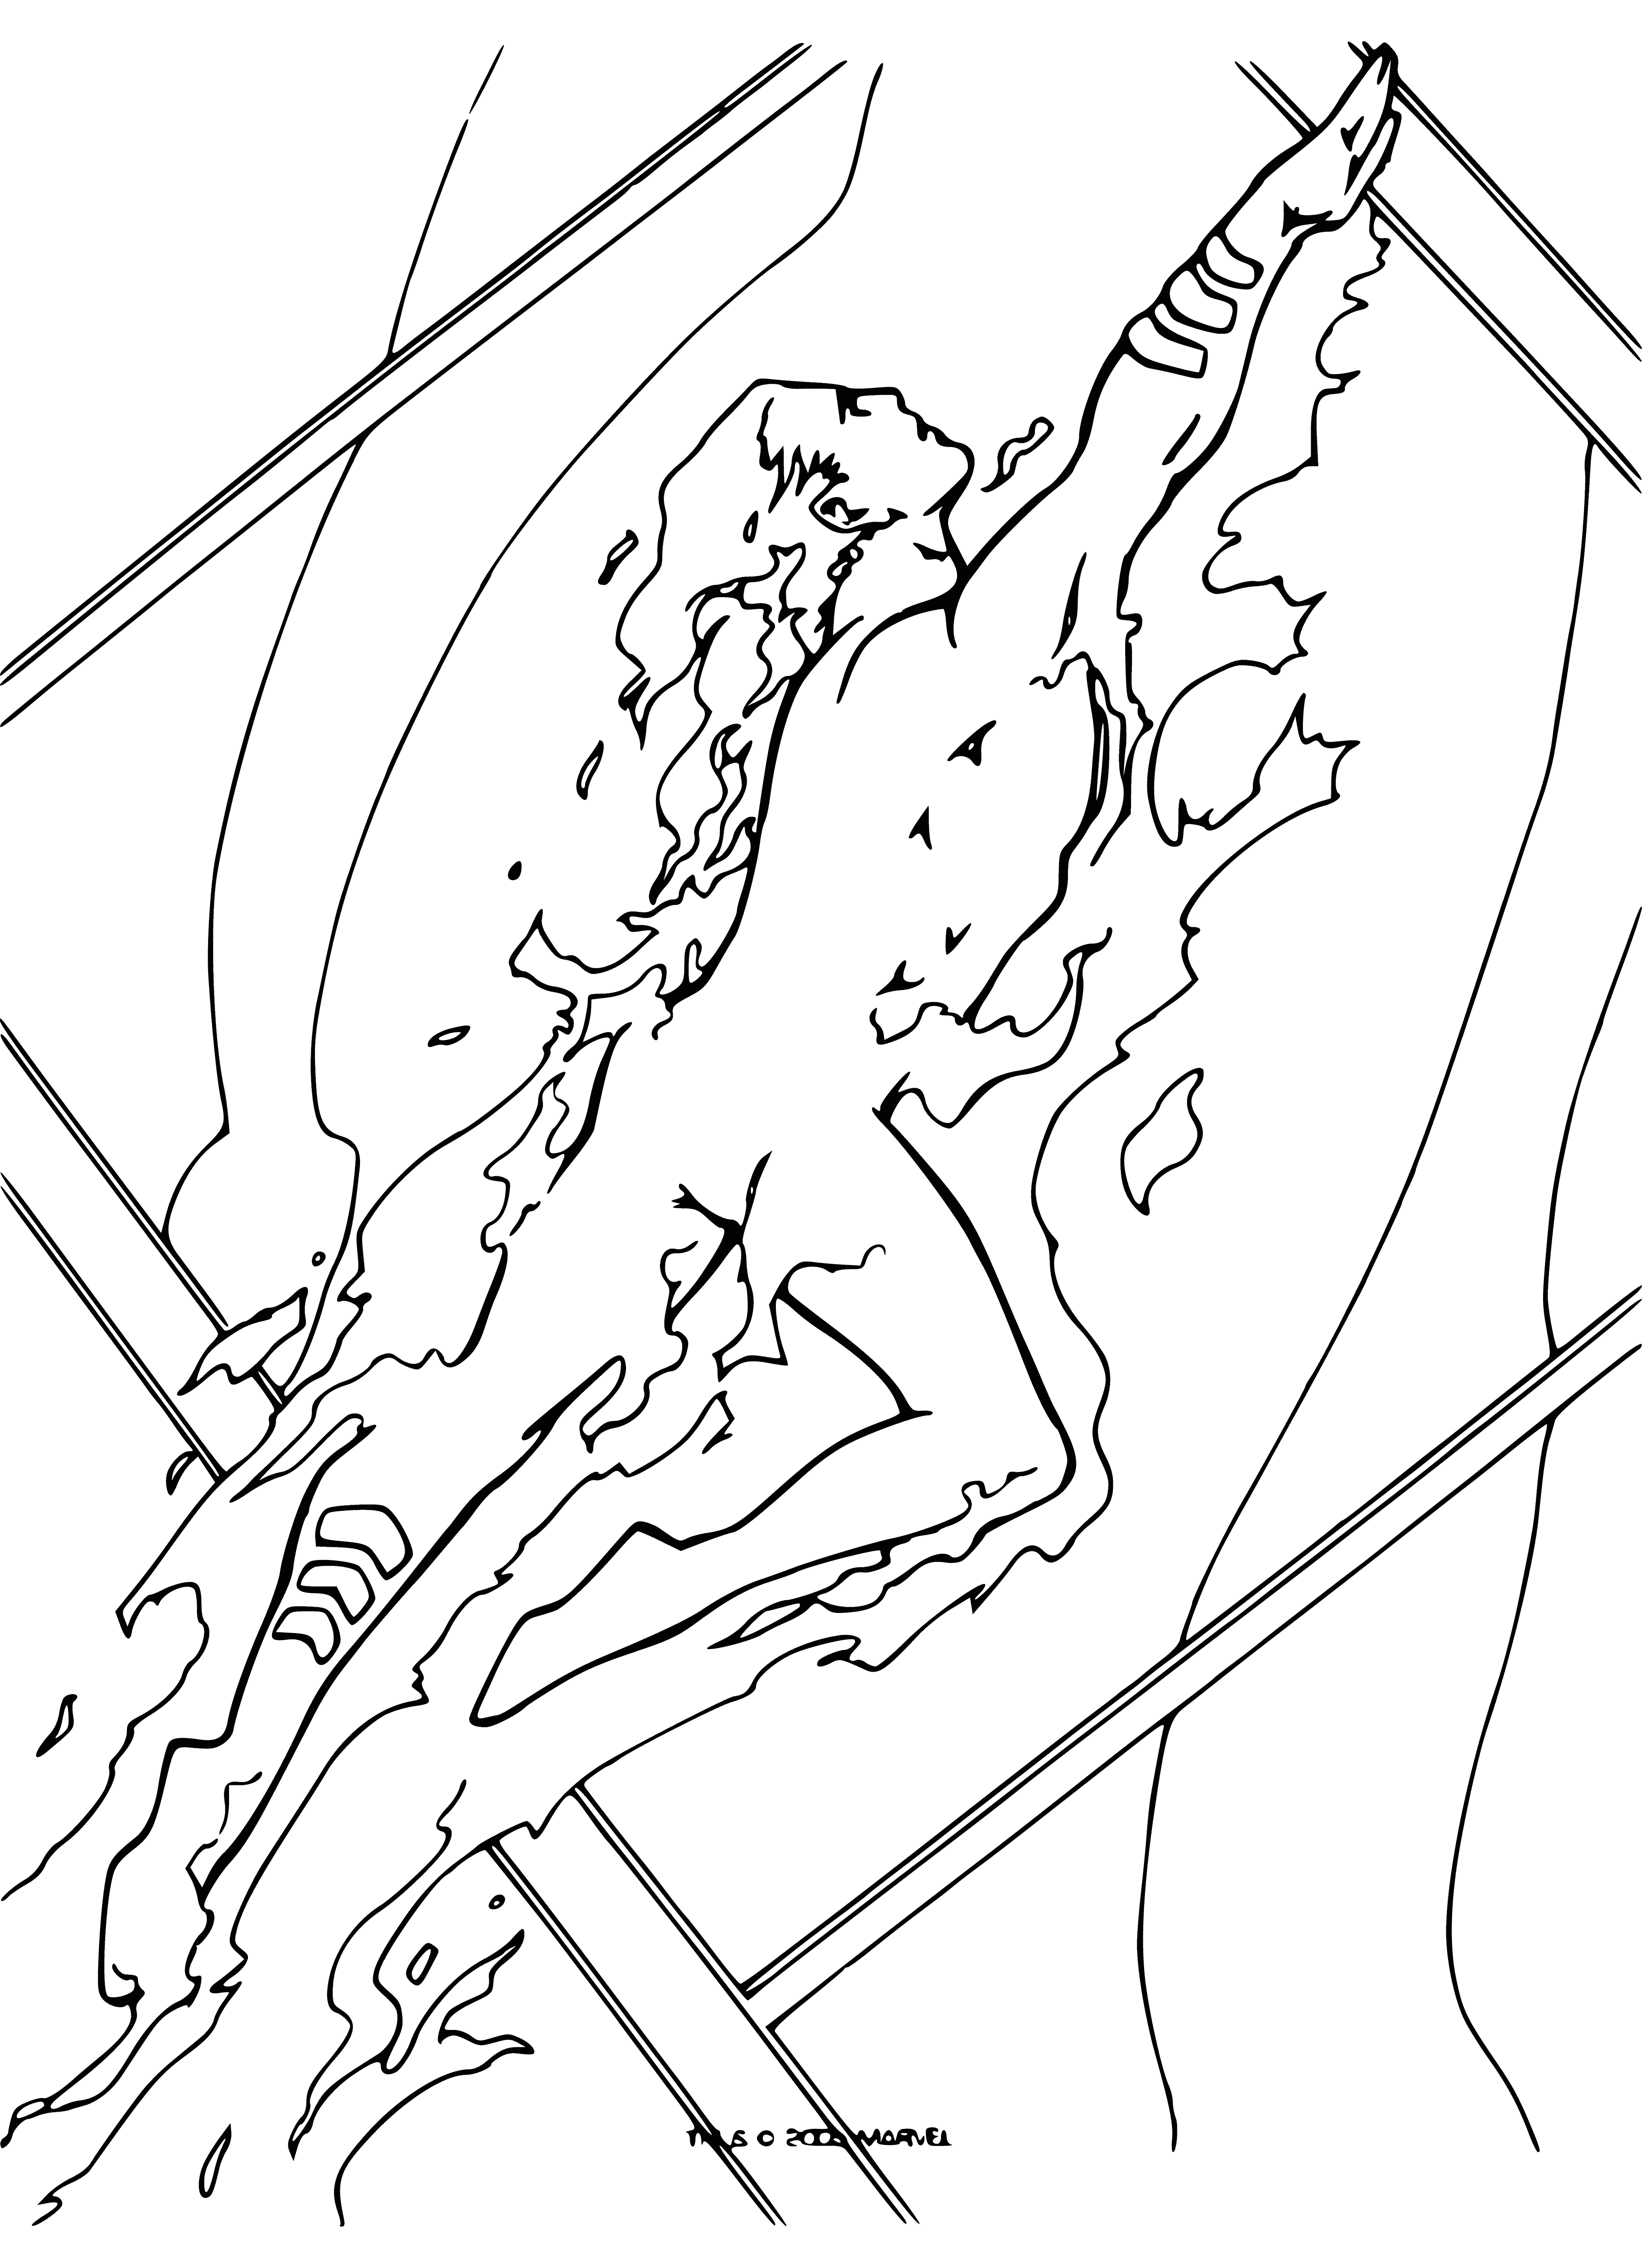 coloring page: Johnny soars the sky, body aflame in red & white costume, having the time of his life.